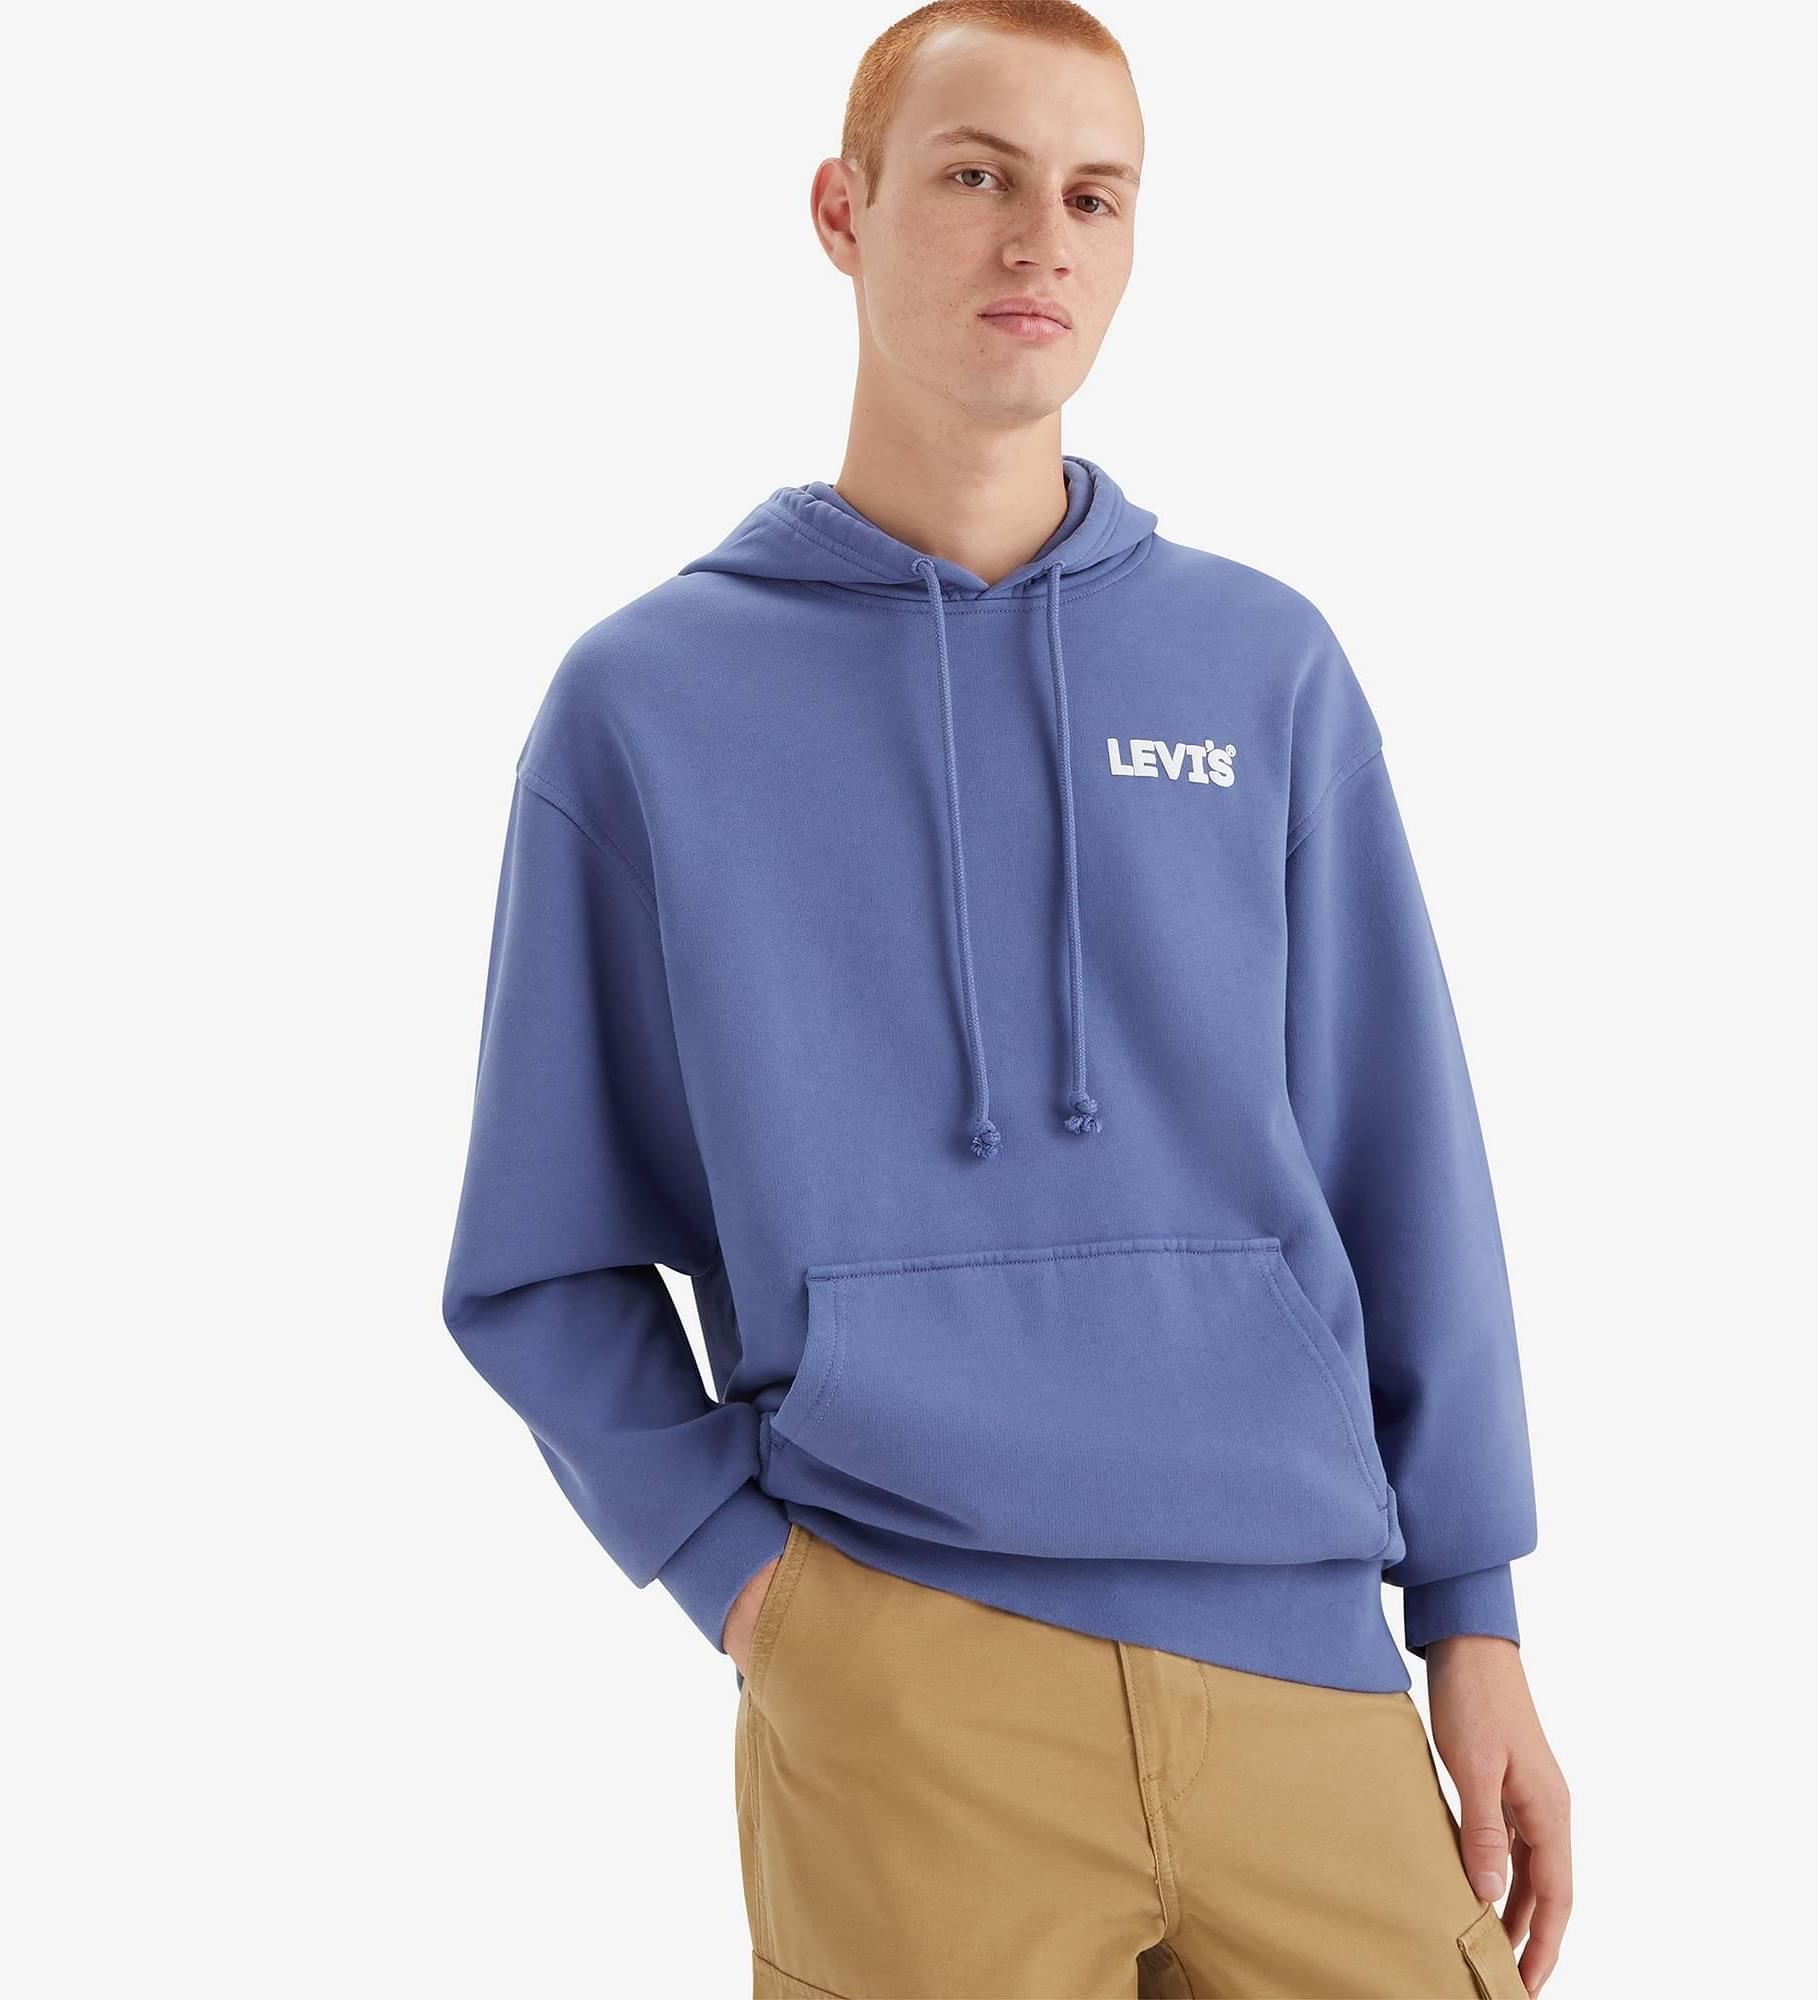 https://levi.pt/content/img/1818x2000/levis_hoodie_masculino_relaxed-fit-graphic-hoodie-38479-0278_headline-hoodie-coastal-fjord_1.jpg